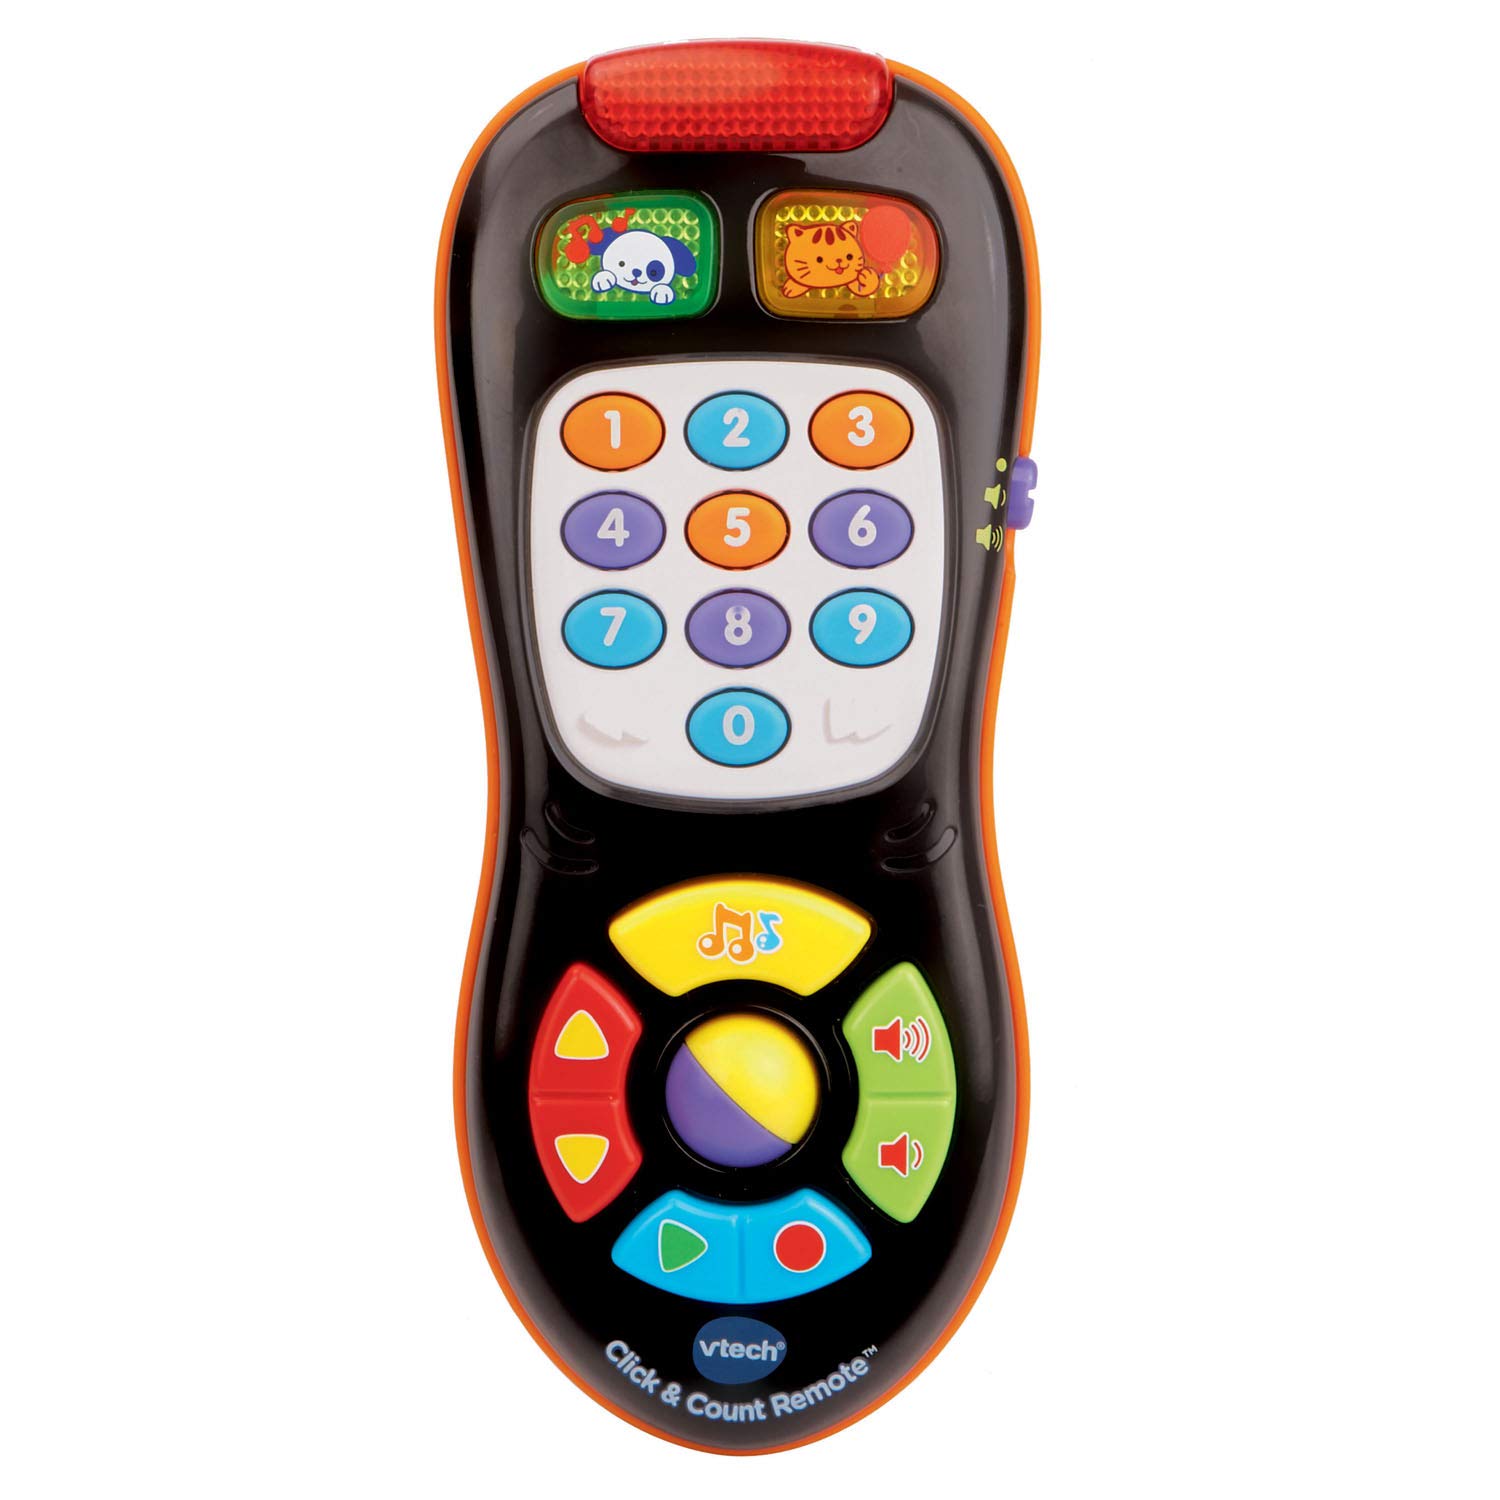 Book Cover VTech Click and Count Remote (Frustration Free Packaging), Black